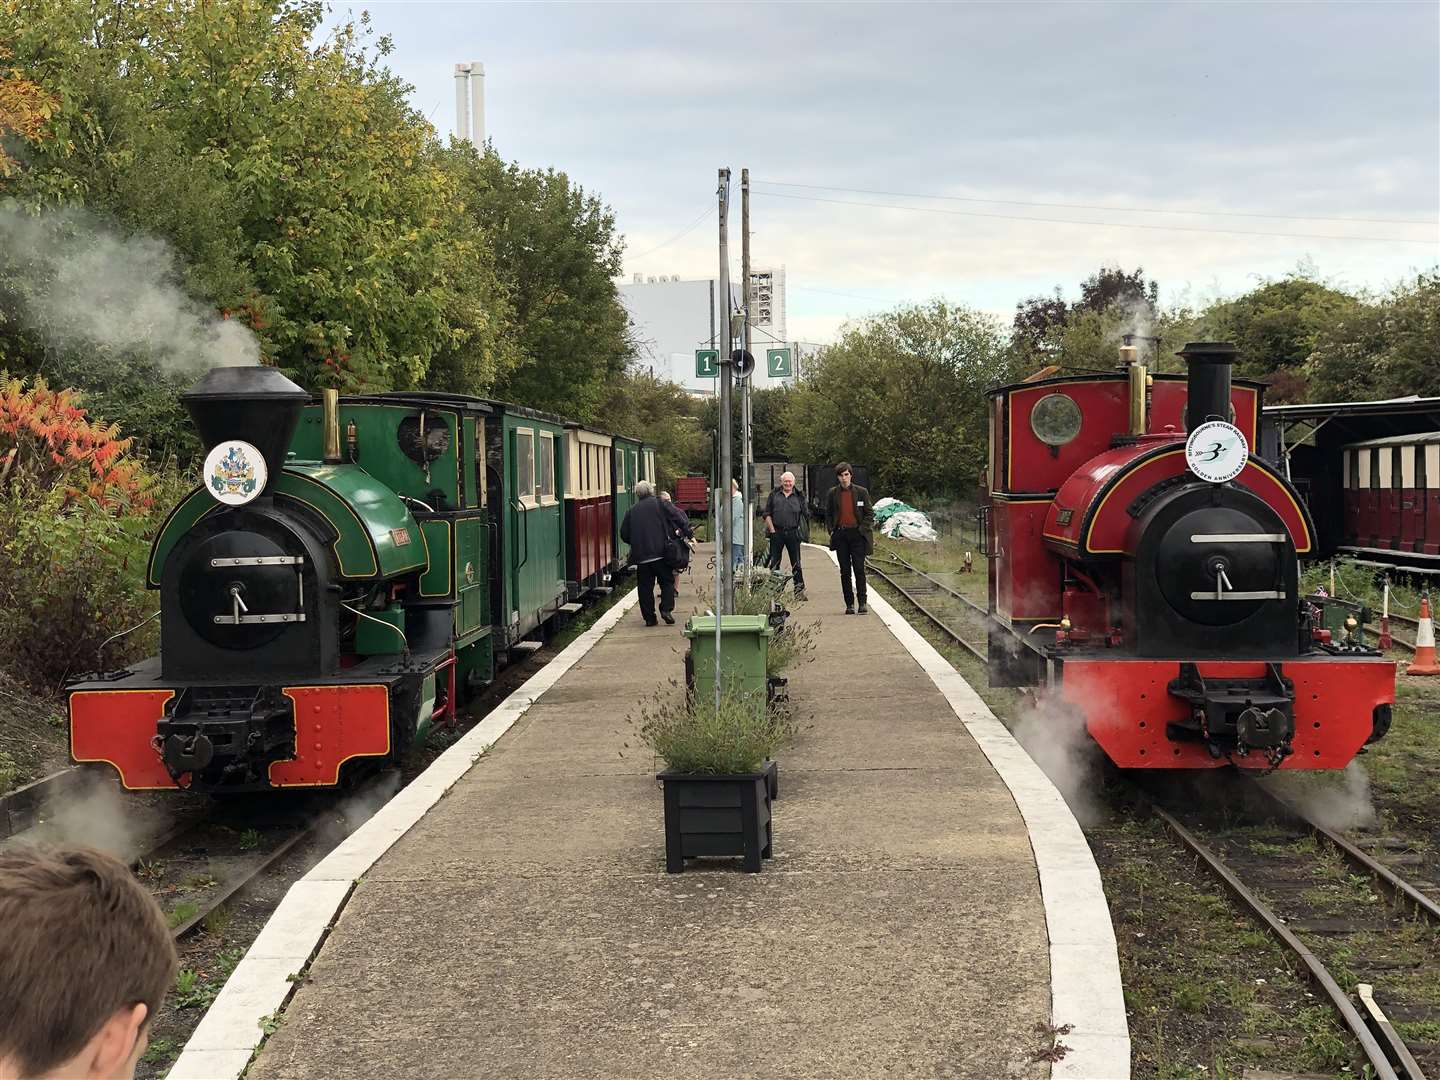 Sittingbourne and Kemsley Light Railway is offering £10 rides